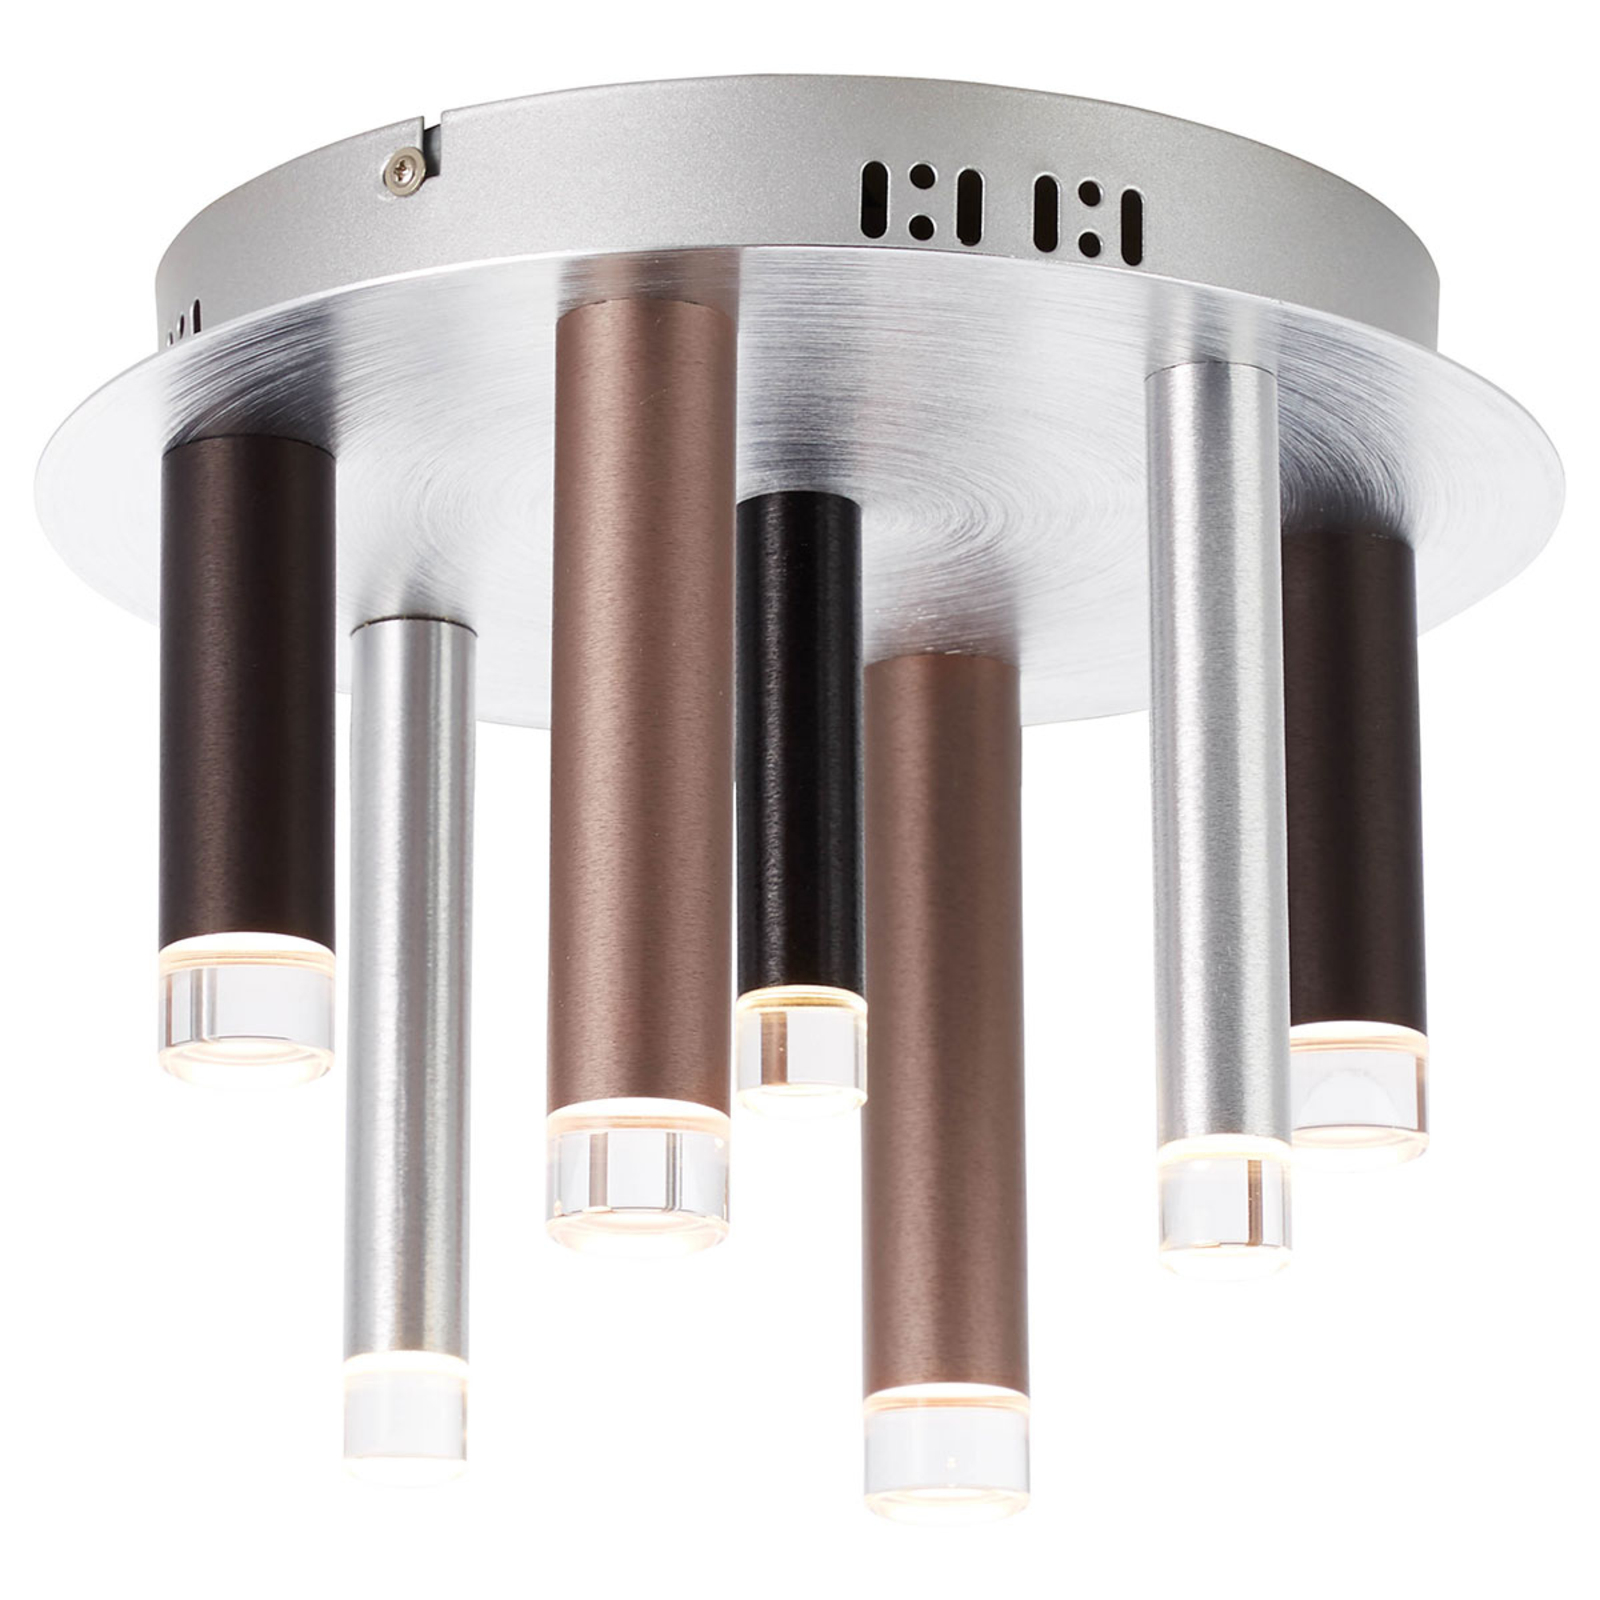 Plafonnier LED Cembalo dimmable 7 lampes